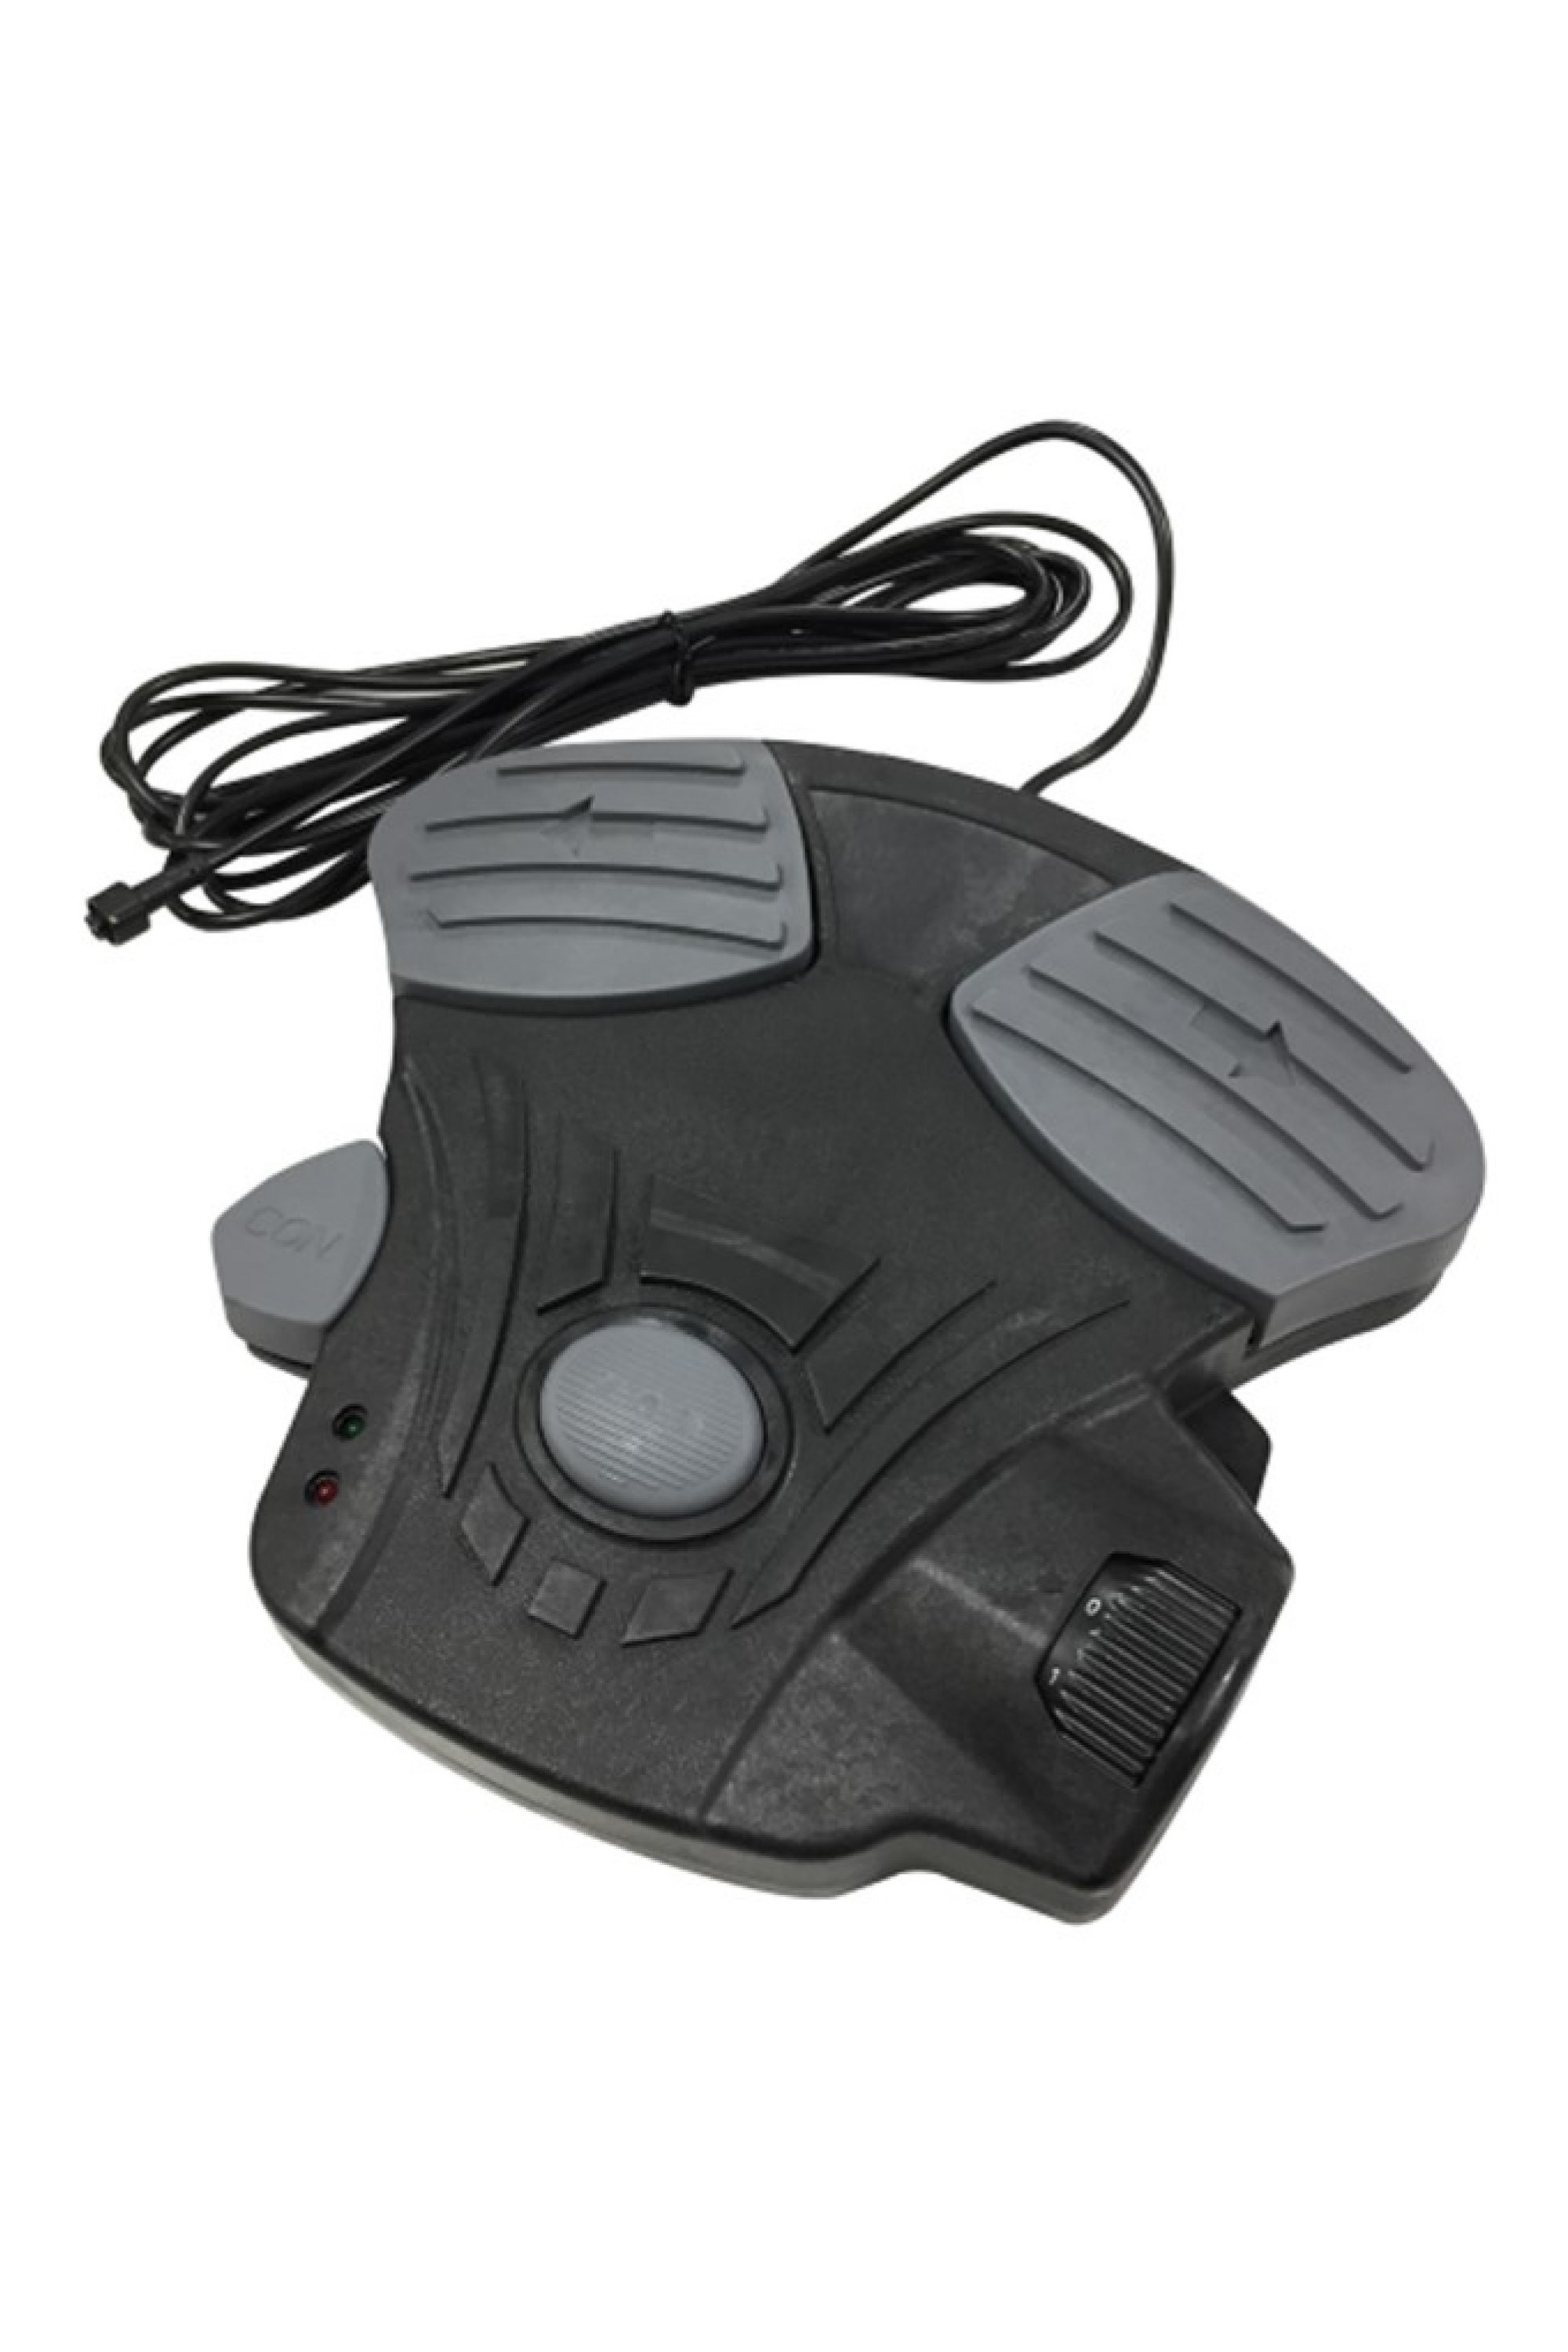 Gps Foot Control Unit For Watersnake Motor -